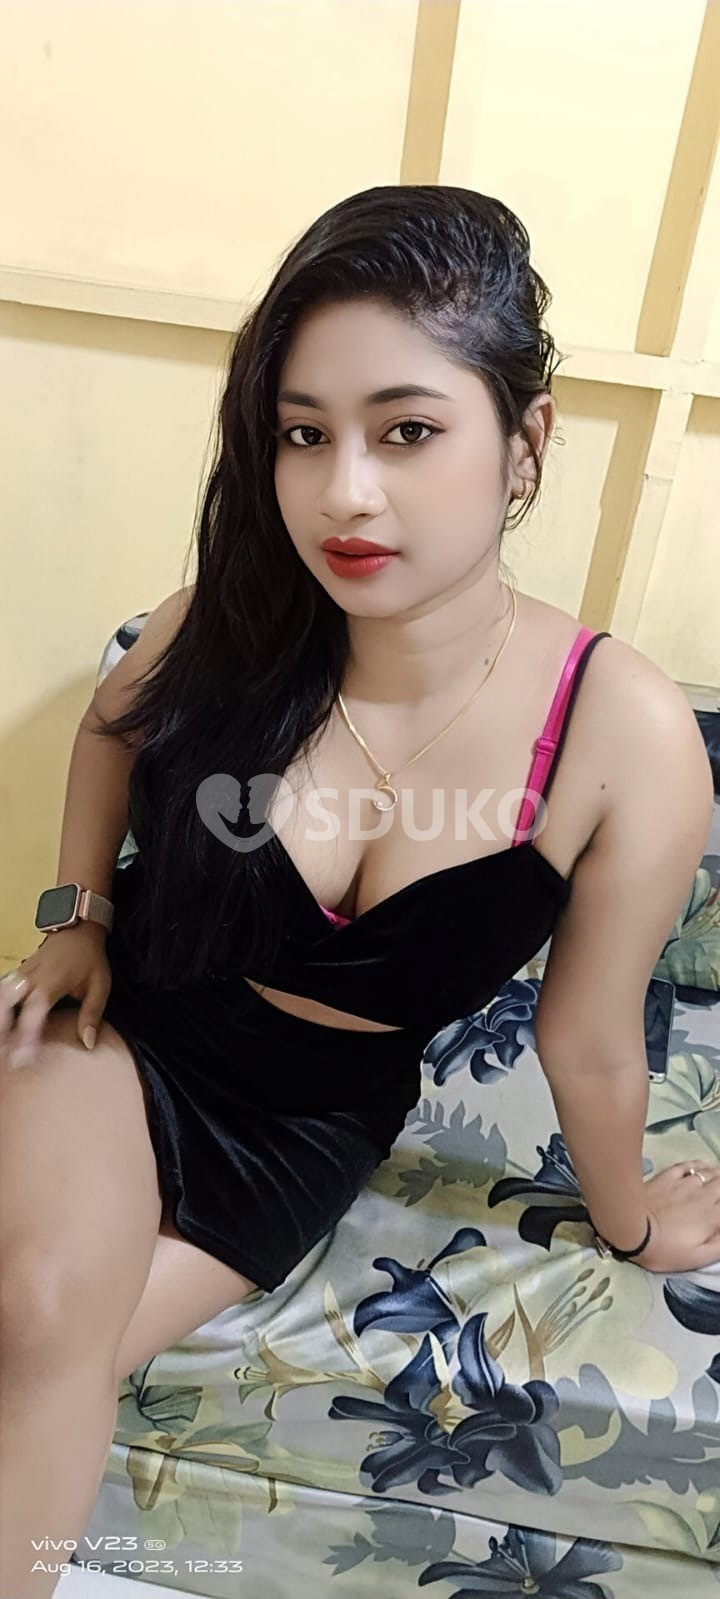 Vijayawada ❣️Best call girl /service in low price high profile call girl available call me anytime